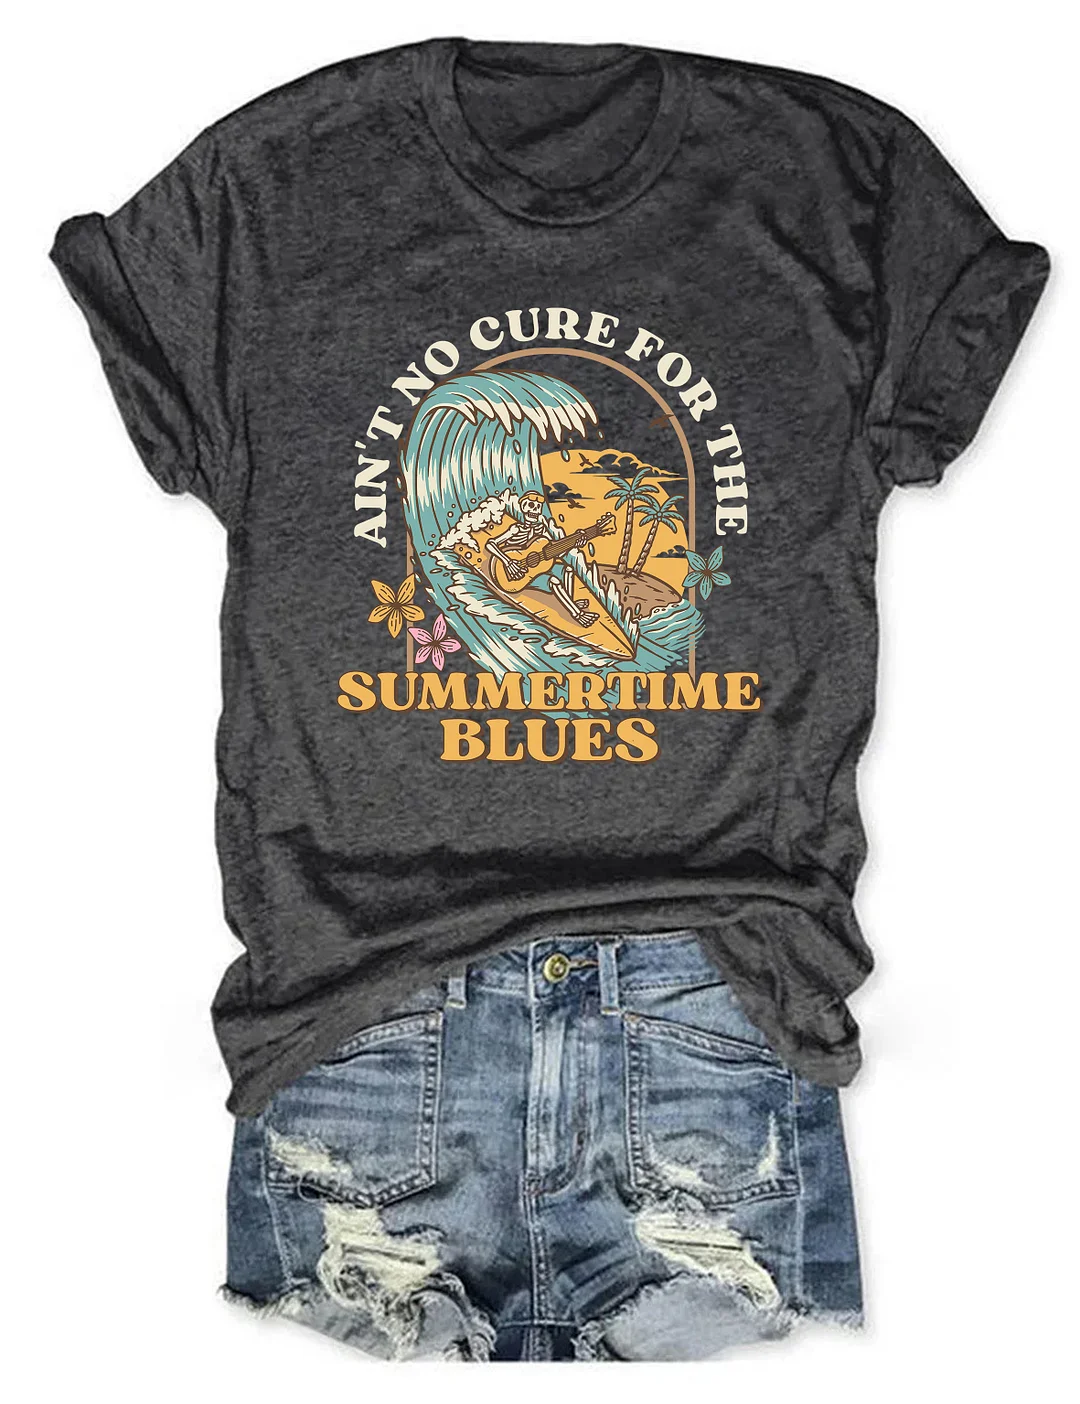 Ain't No Cure For the Summertime Blues T-shirt